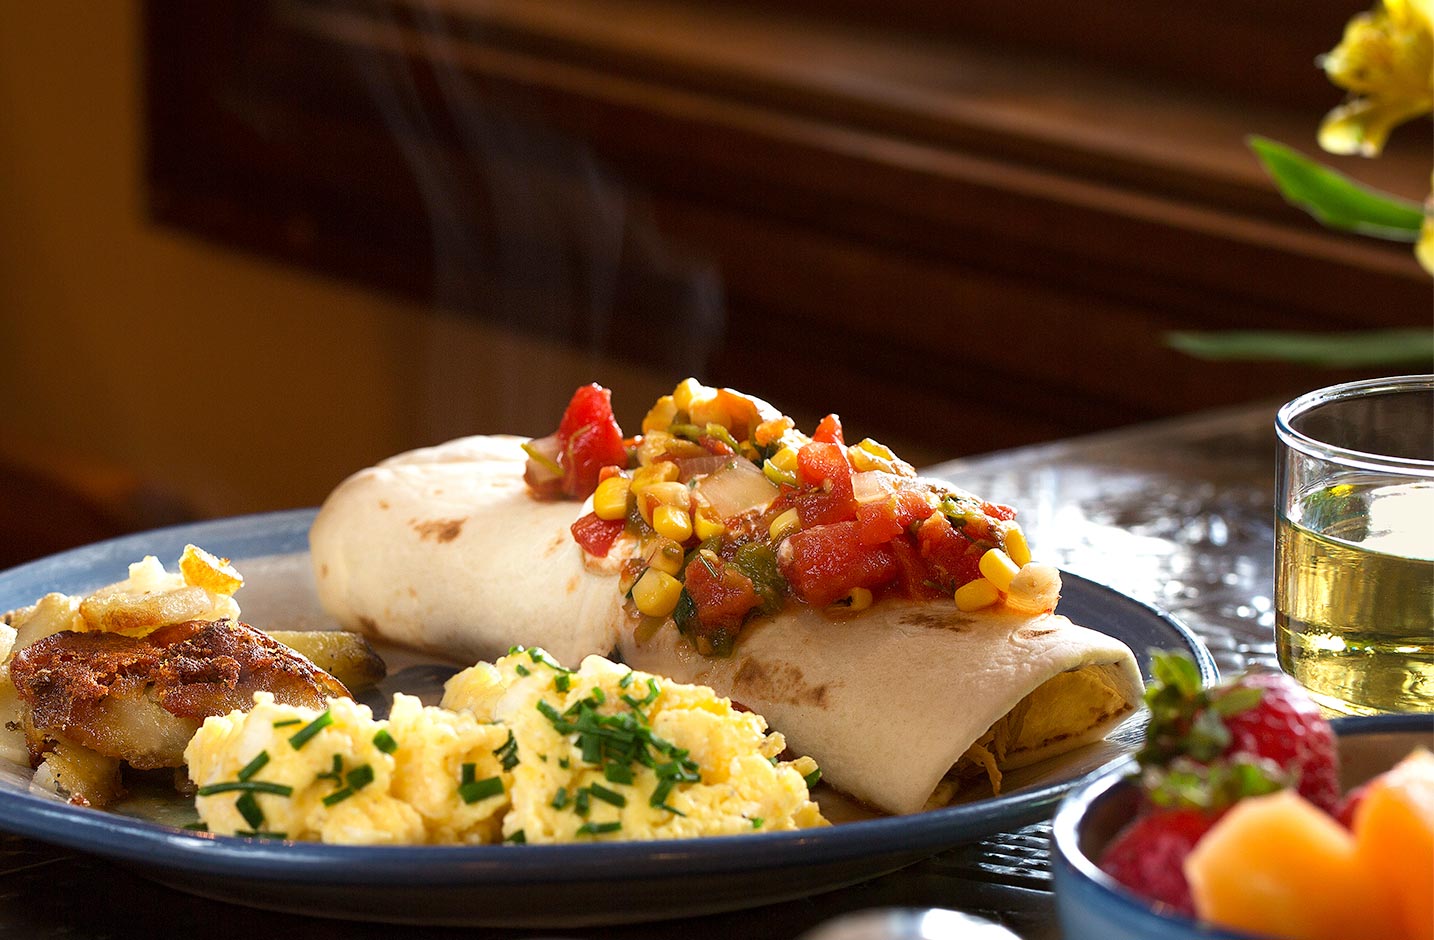 Breakfast burrito topped with corn salsa served with a side of breakfast potatoes and eggs